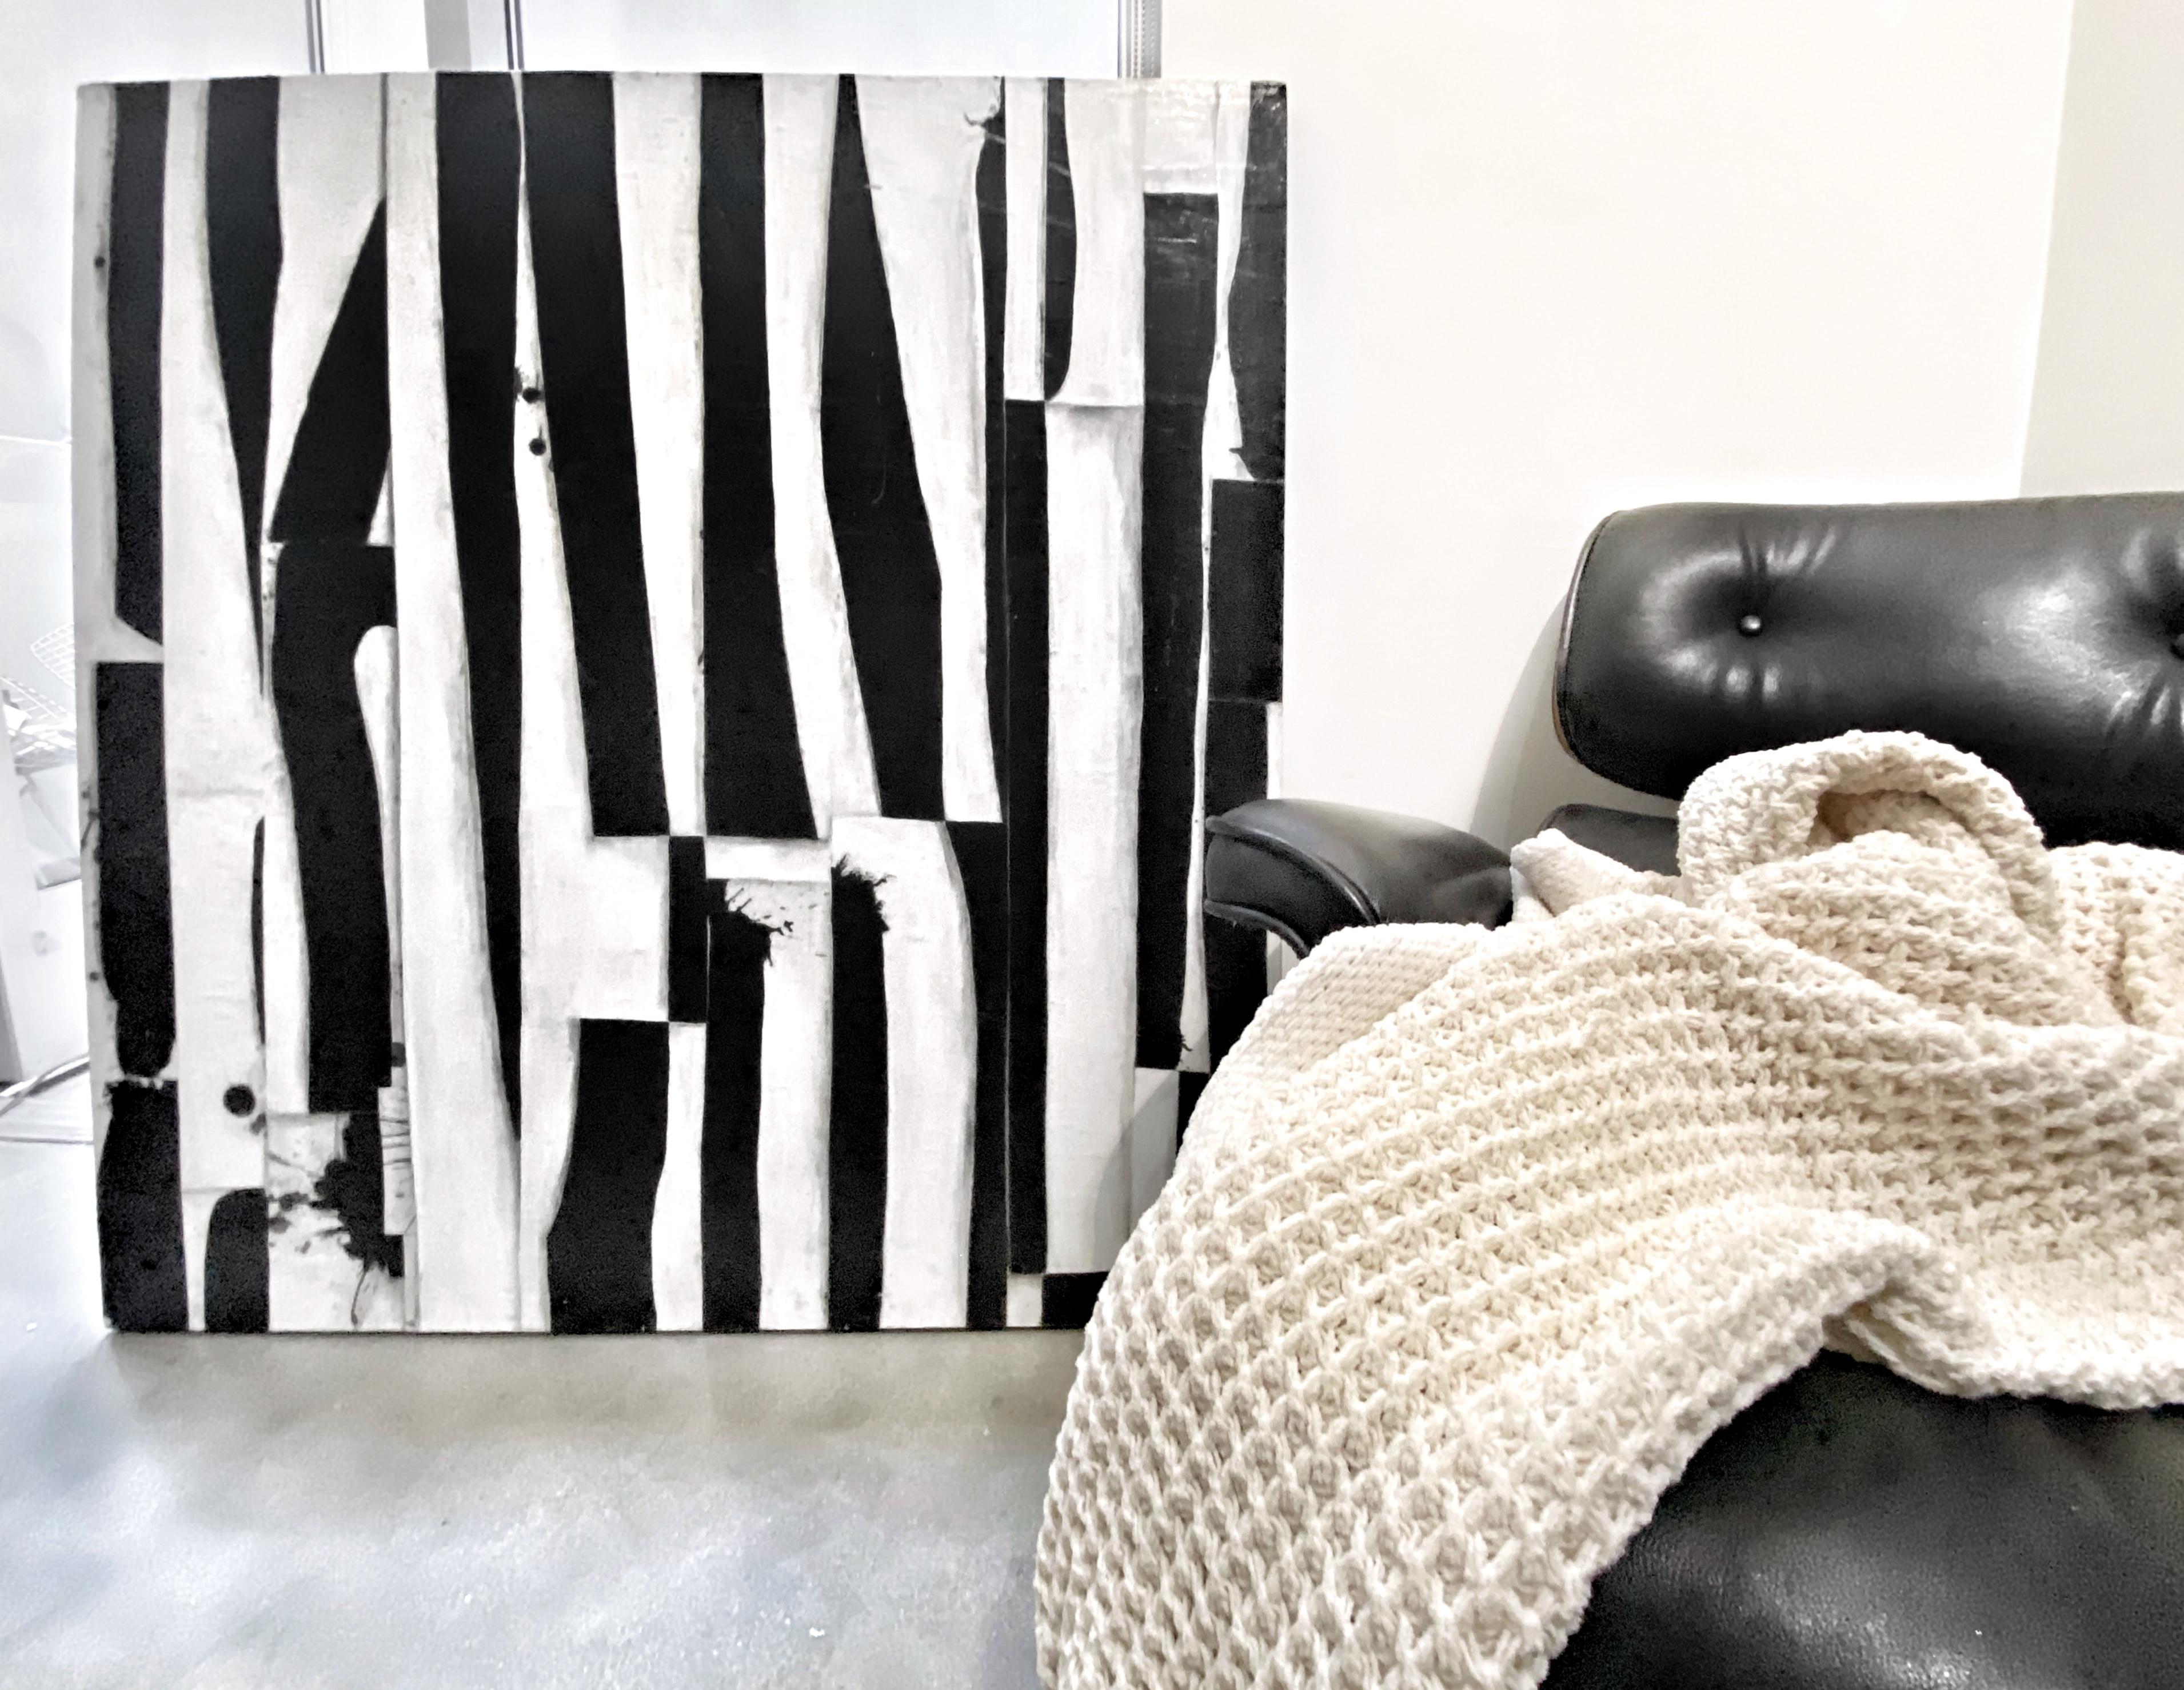 This is a black and white abstract diptych on a wood panel.

This series is very minimalistic and interior. 
Most of the time, I use just two colors and work with geometric and abstract shapes. It doesn't appear as deep as the 'Chaos and Control